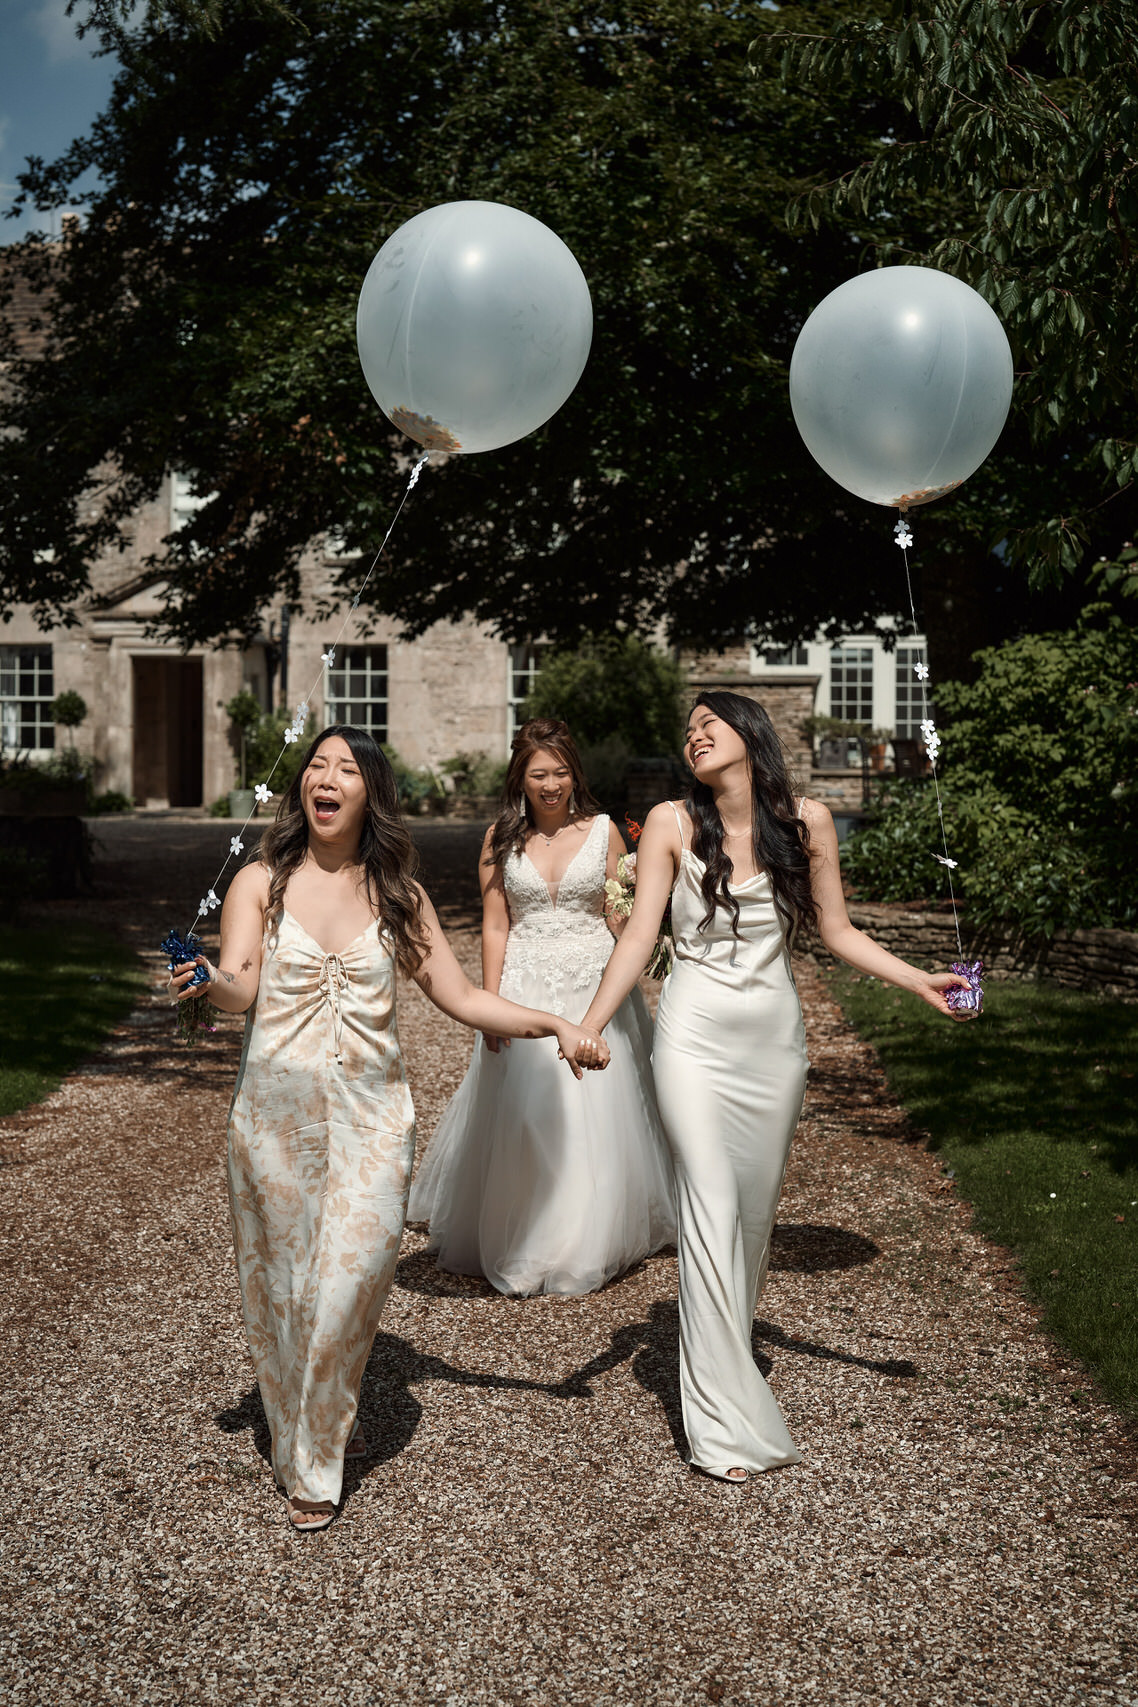 Three girls from a wedding are strolling down a pathway, carrying balloons.